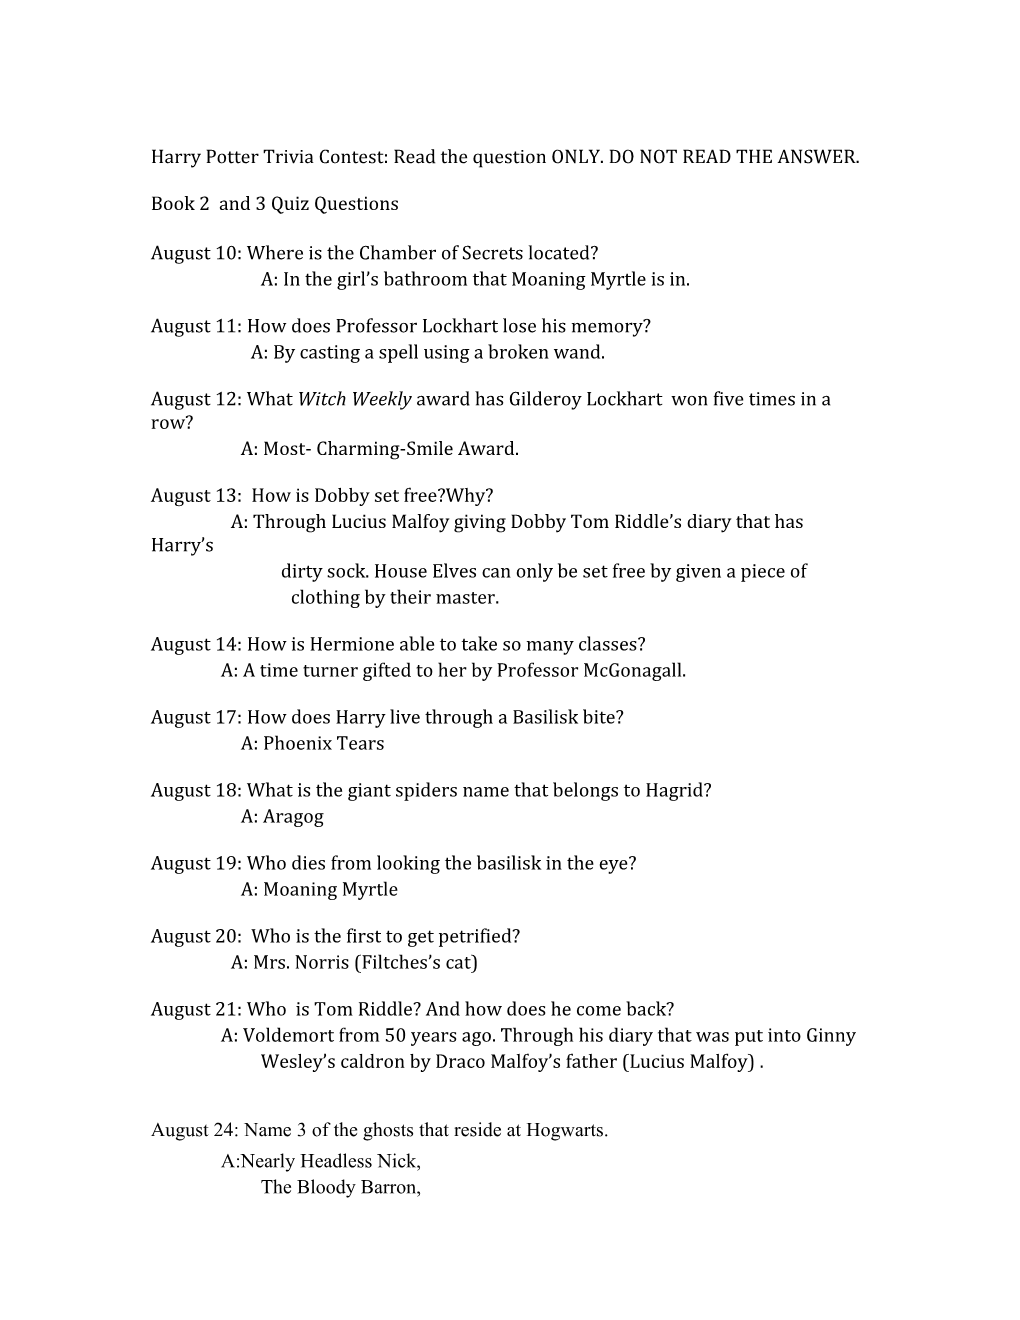 Harry Potter Trivia Contest: Read the Question ONLY. DO NOT READ the ANSWER